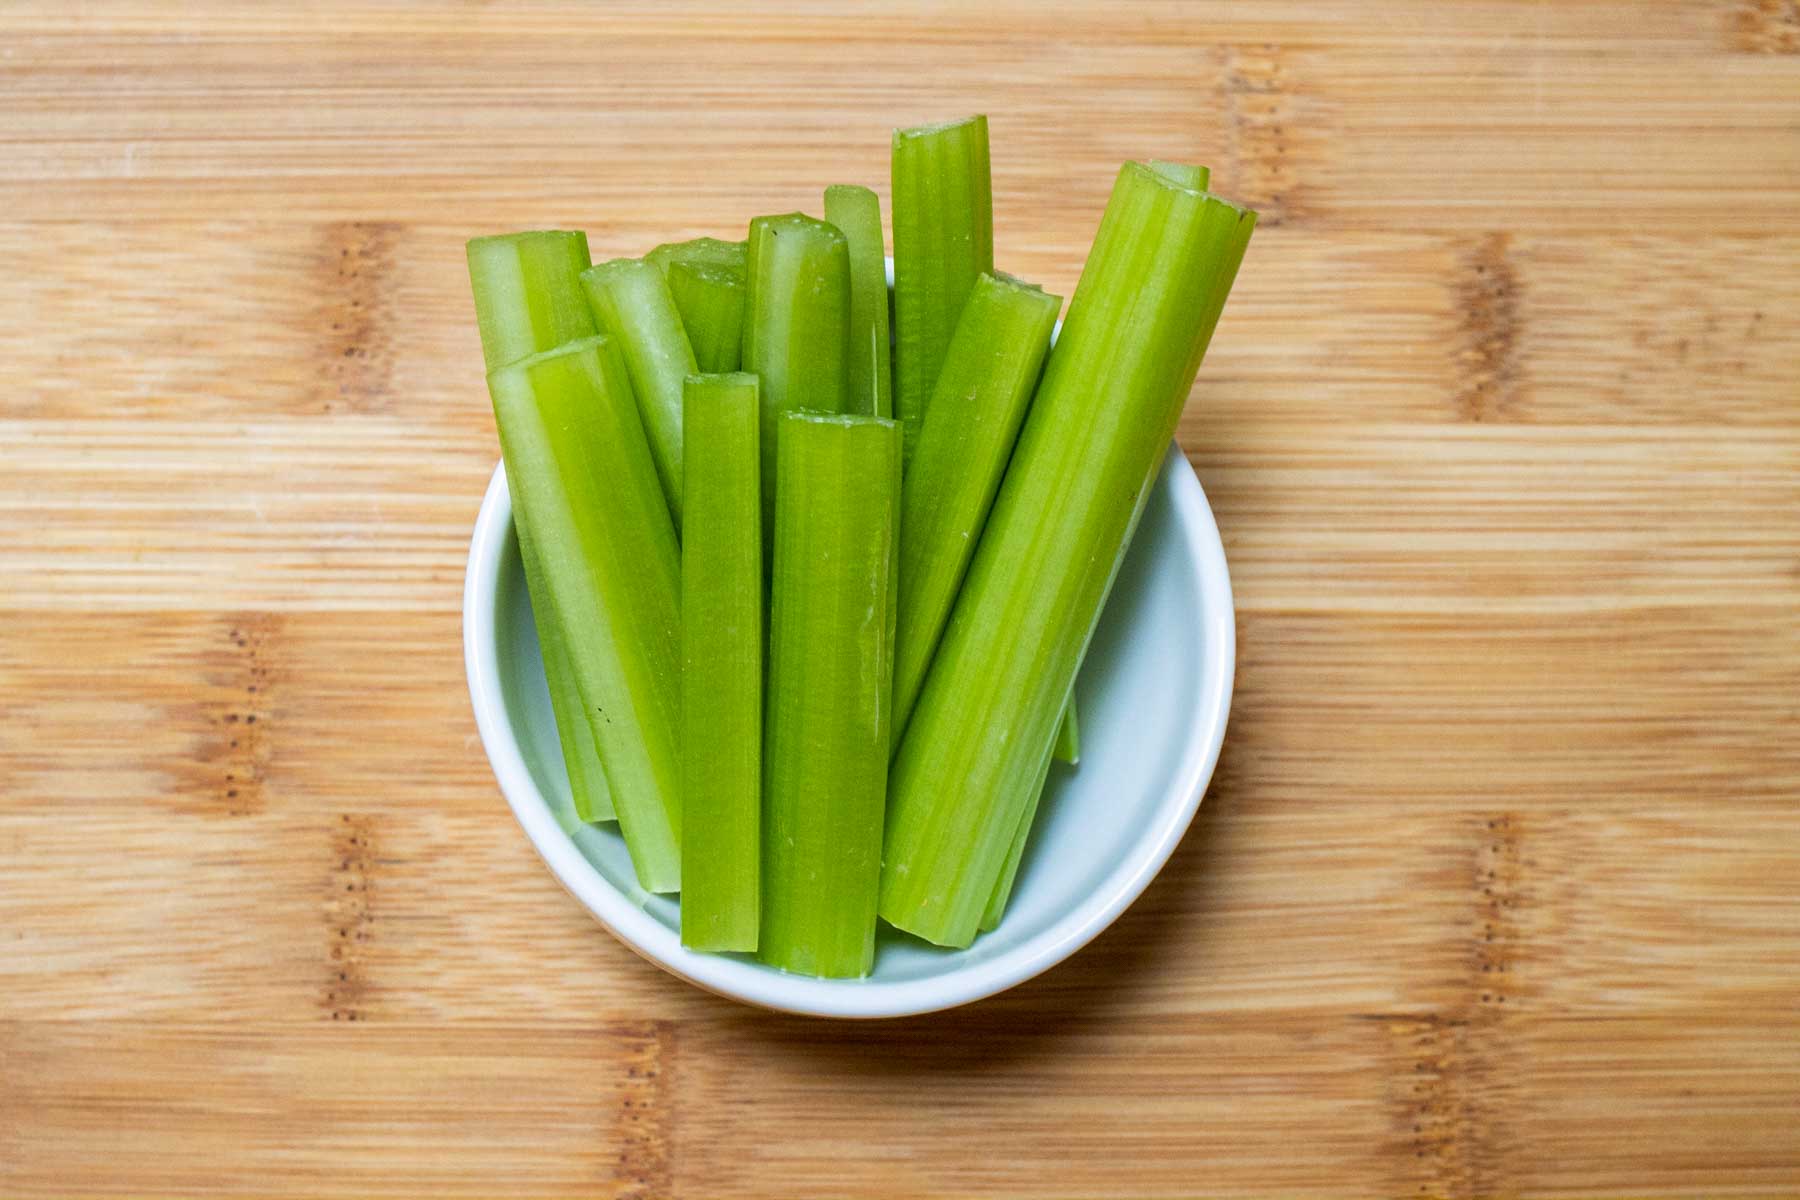 Celery sticks in a small white bowl